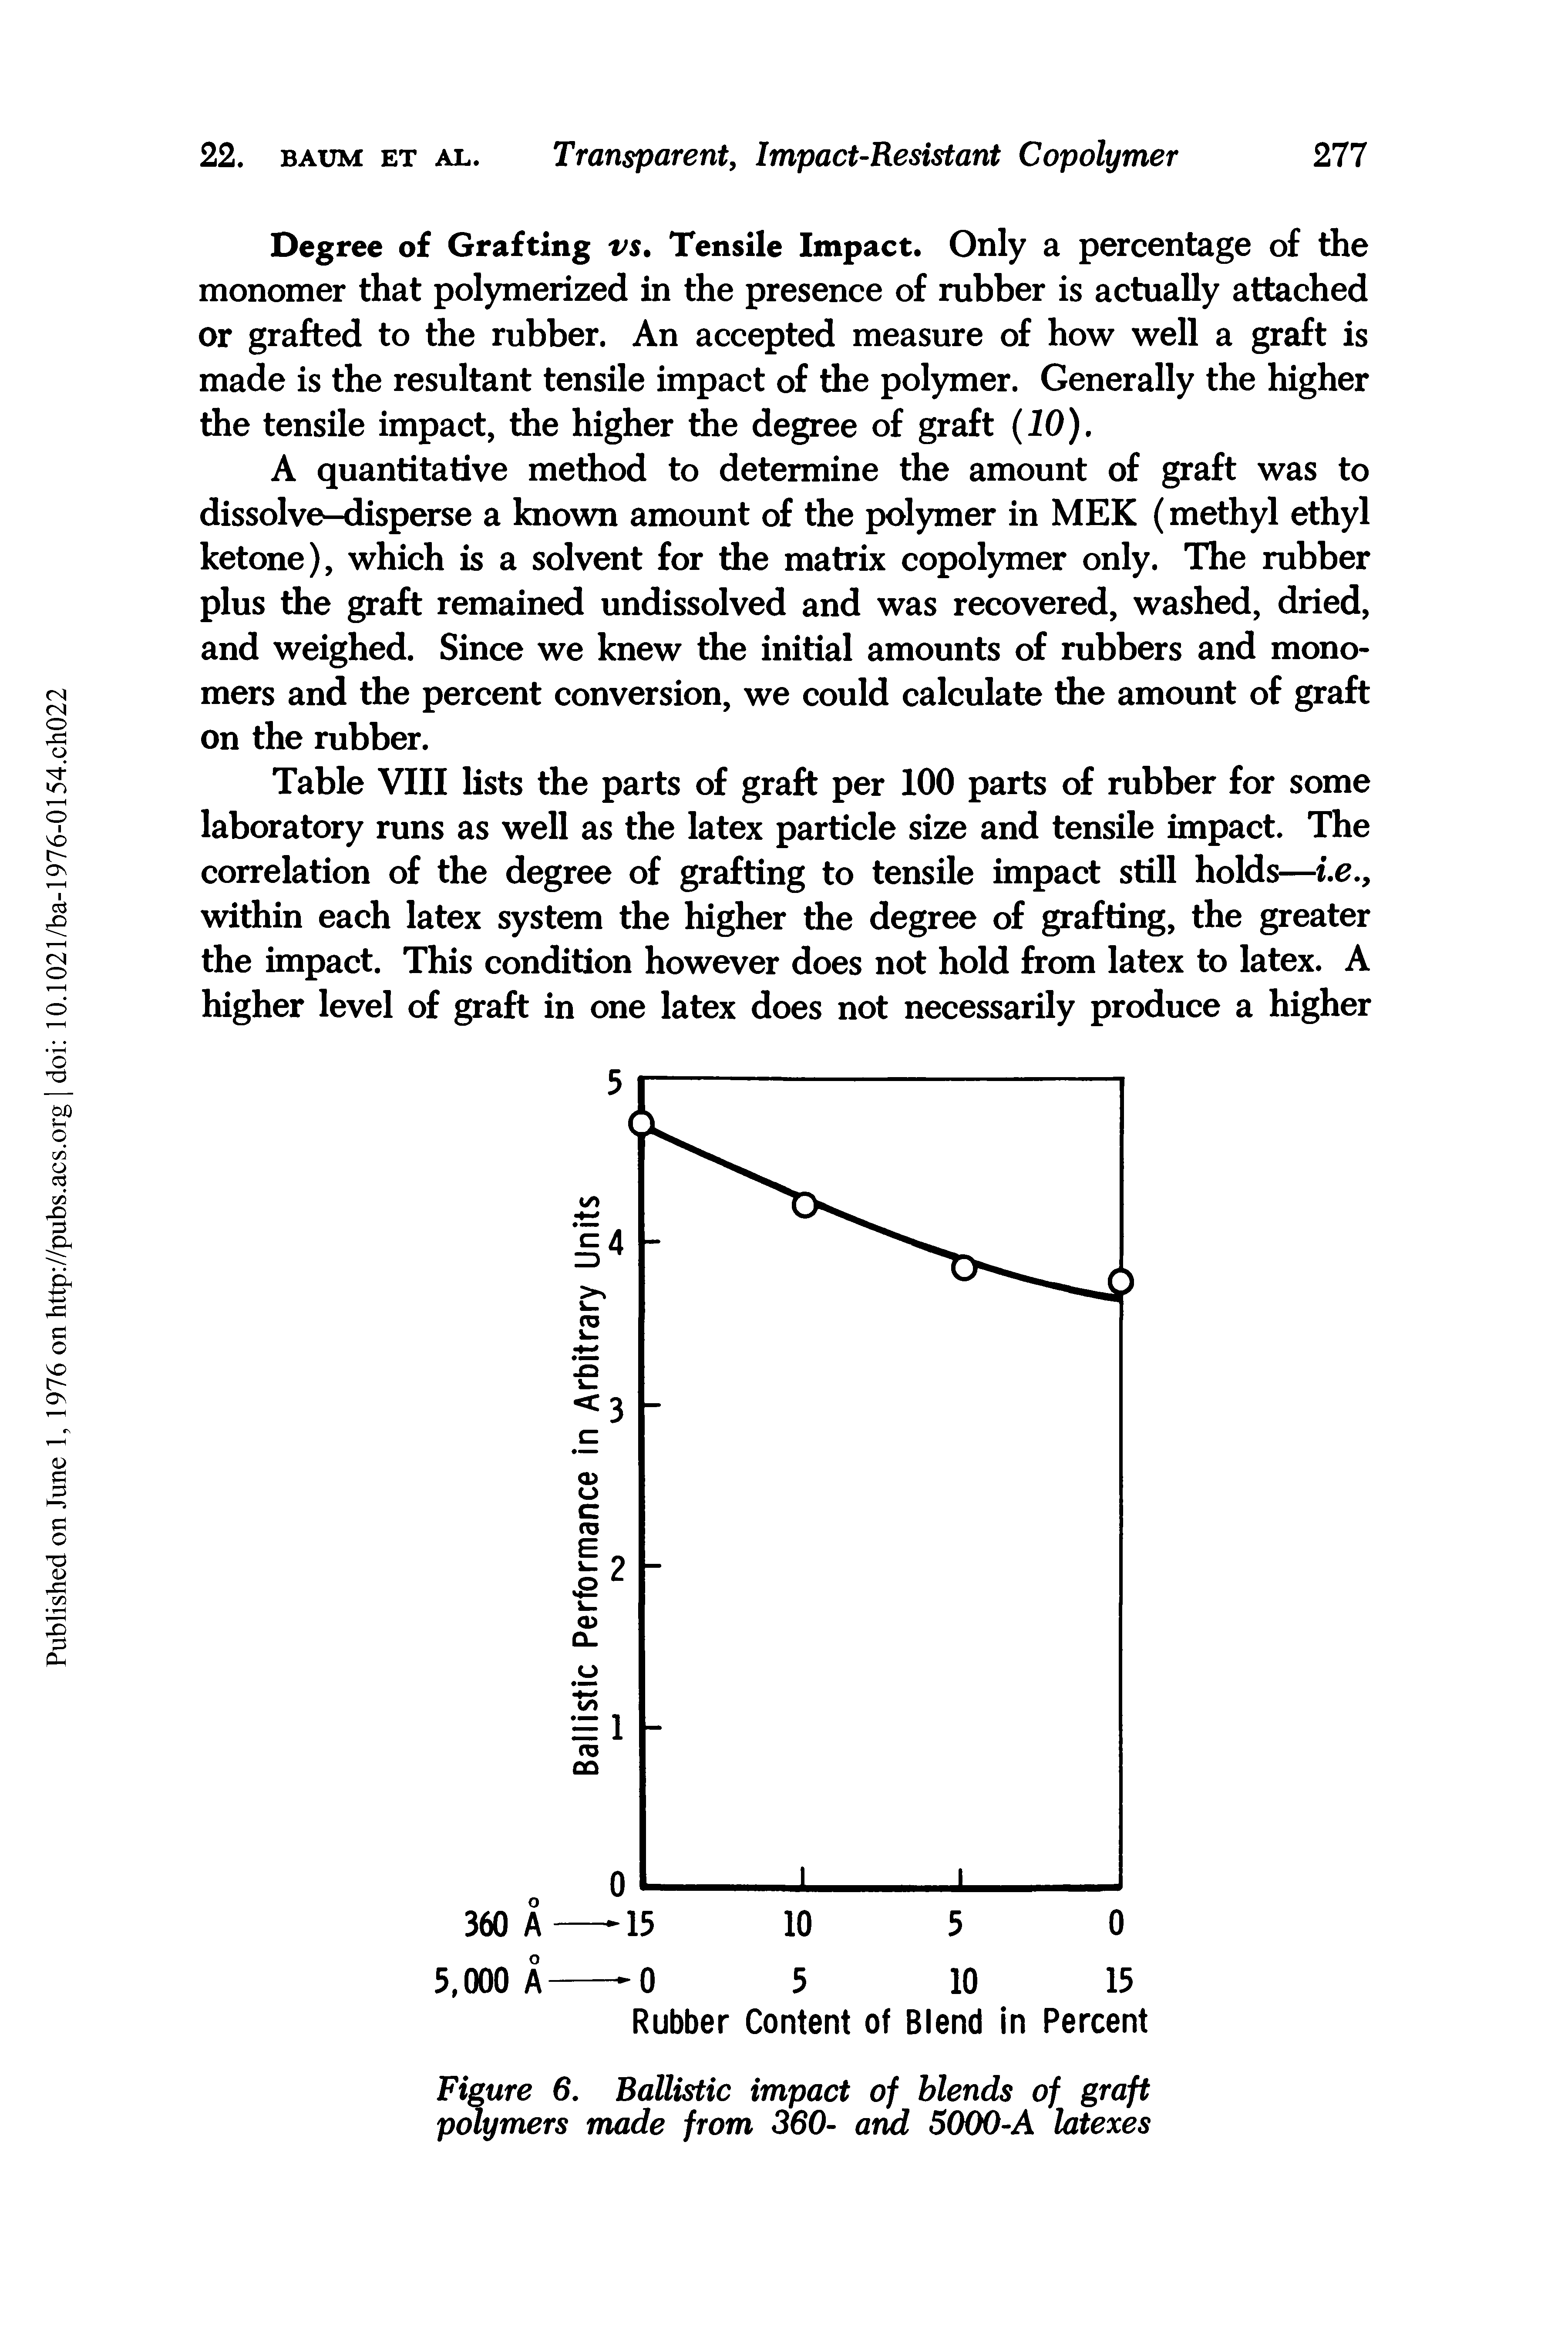 Table VIII lists the parts of graft per 100 parts of rubber for some laboratory runs as well as the latex particle size and tensile impact. The correlation of the degree of grafting to tensile impact still holds—i.e., within each latex system the higher the degree of grafting, the greater the impact. This condition however does not hold from latex to latex. A higher level of graft in one latex does not necessarily produce a higher...